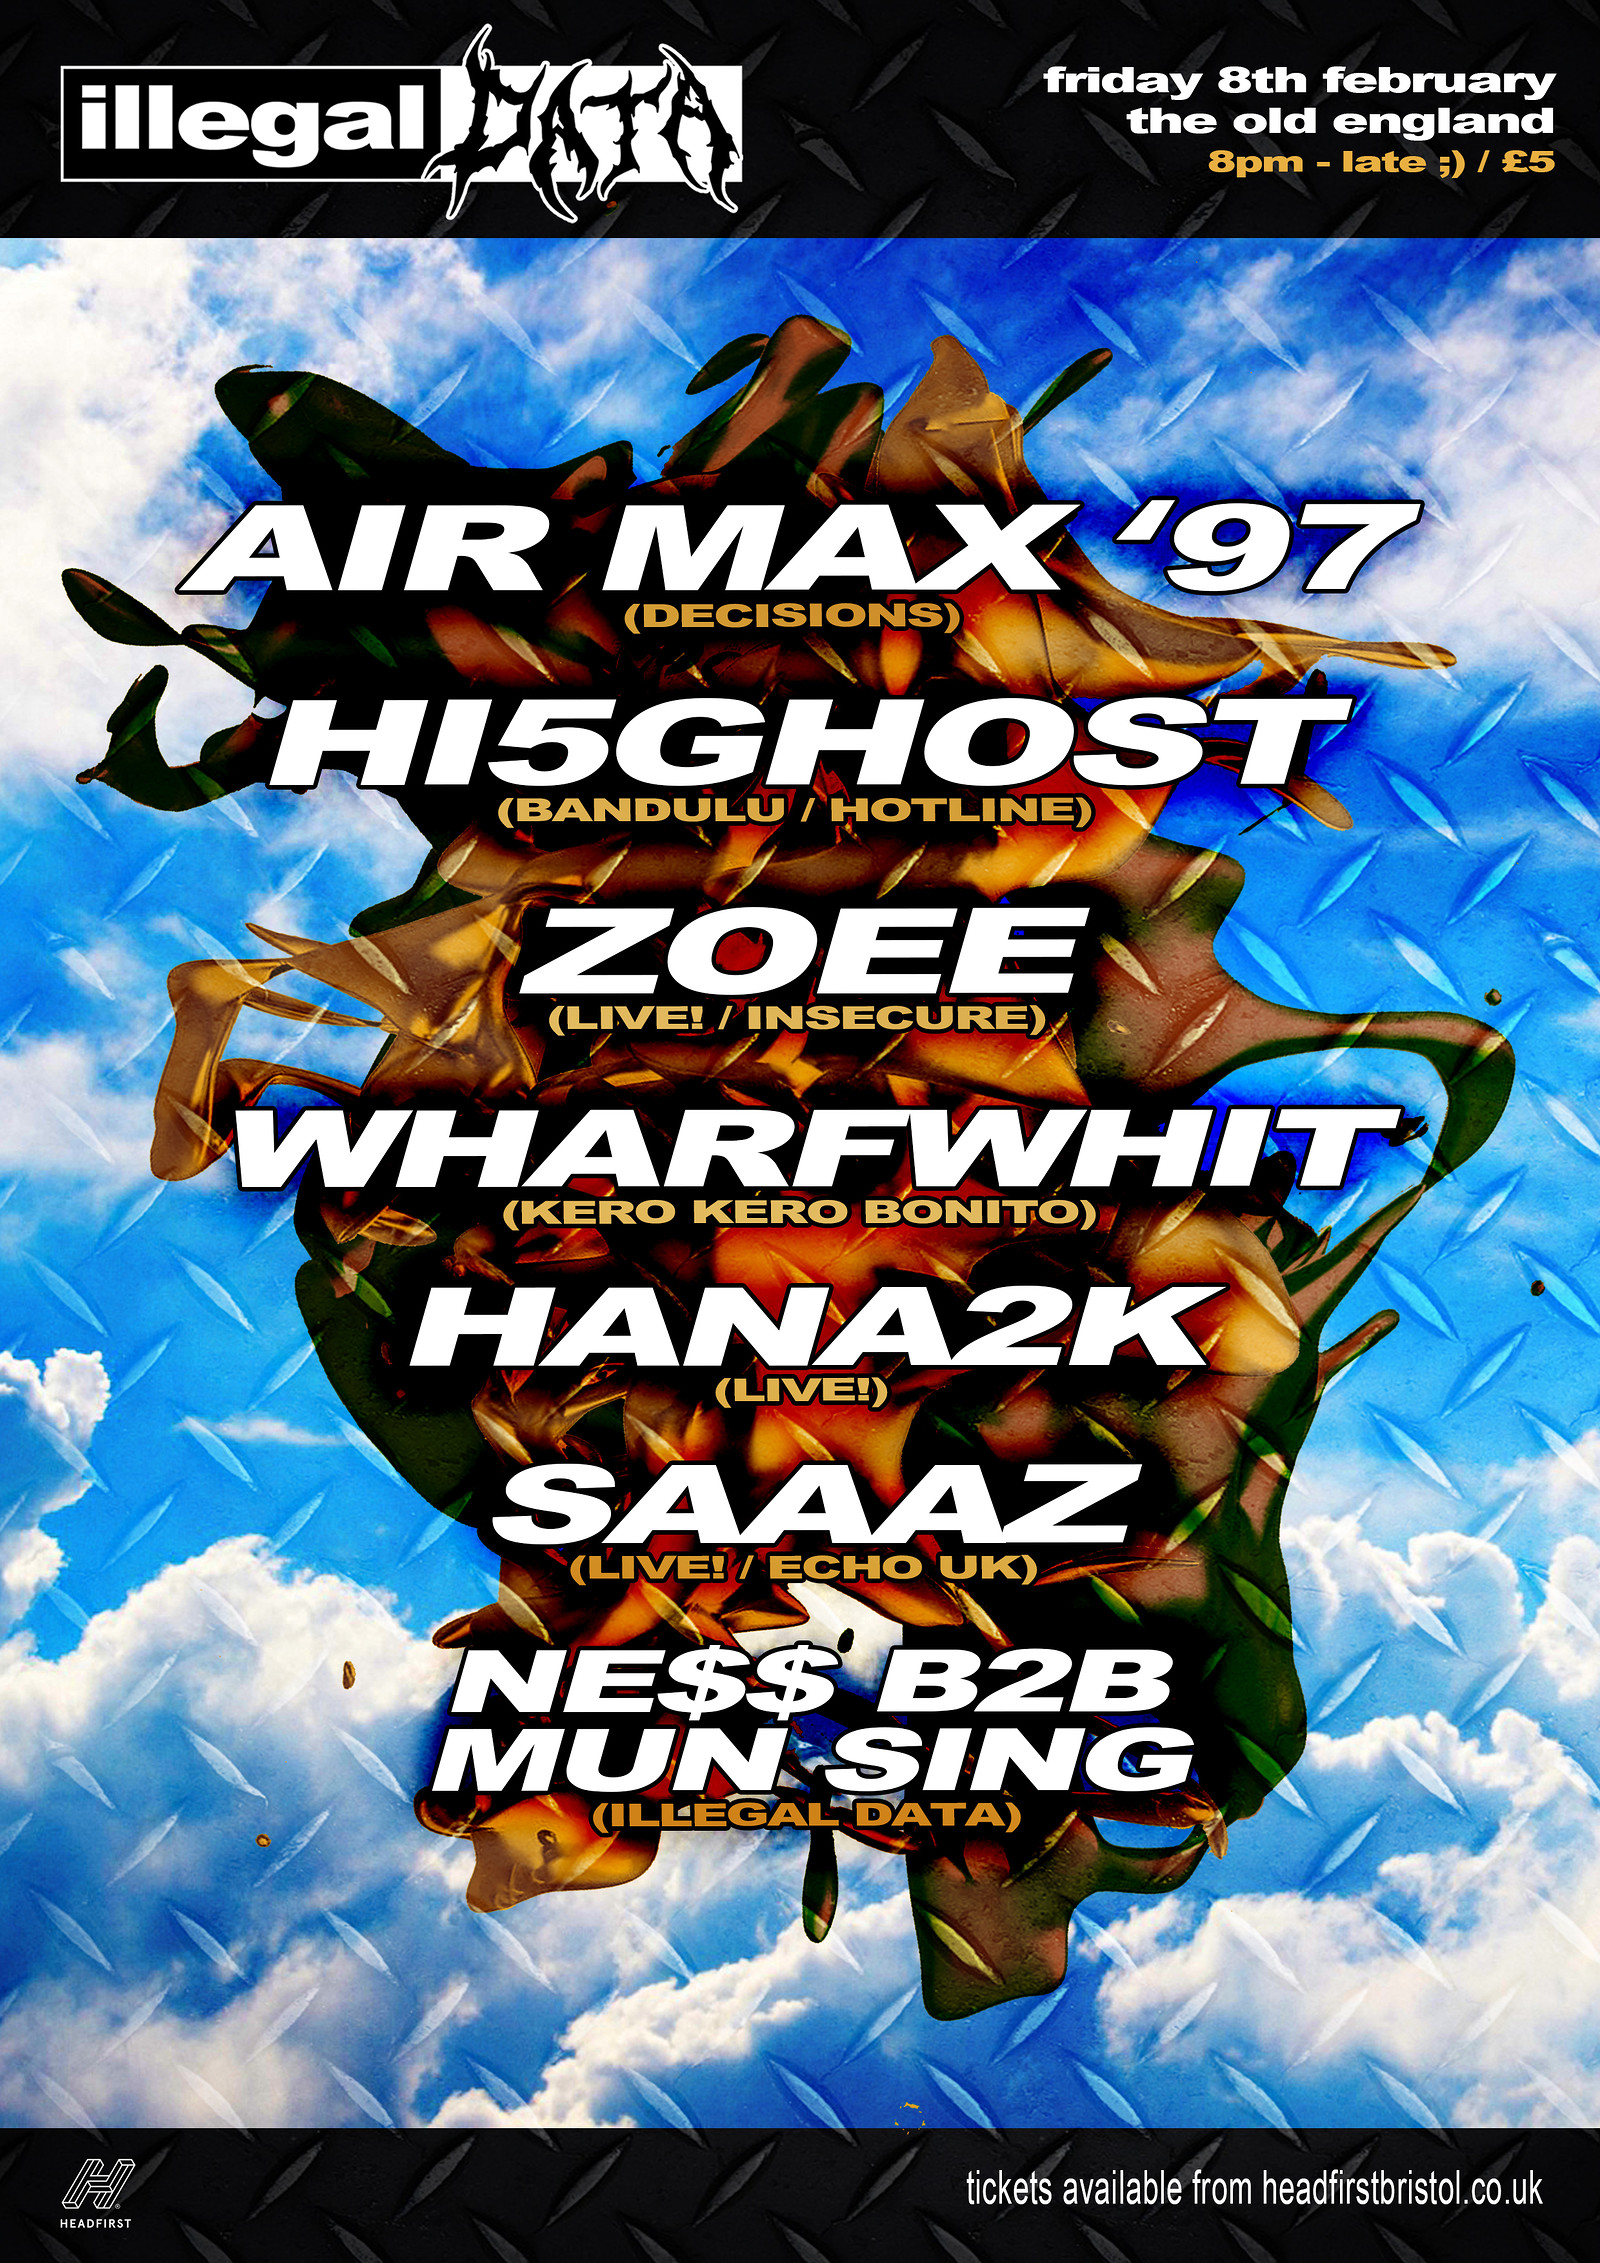 Air Max '97 / Hi5Ghost / Zoee +++ at The Old England Pub